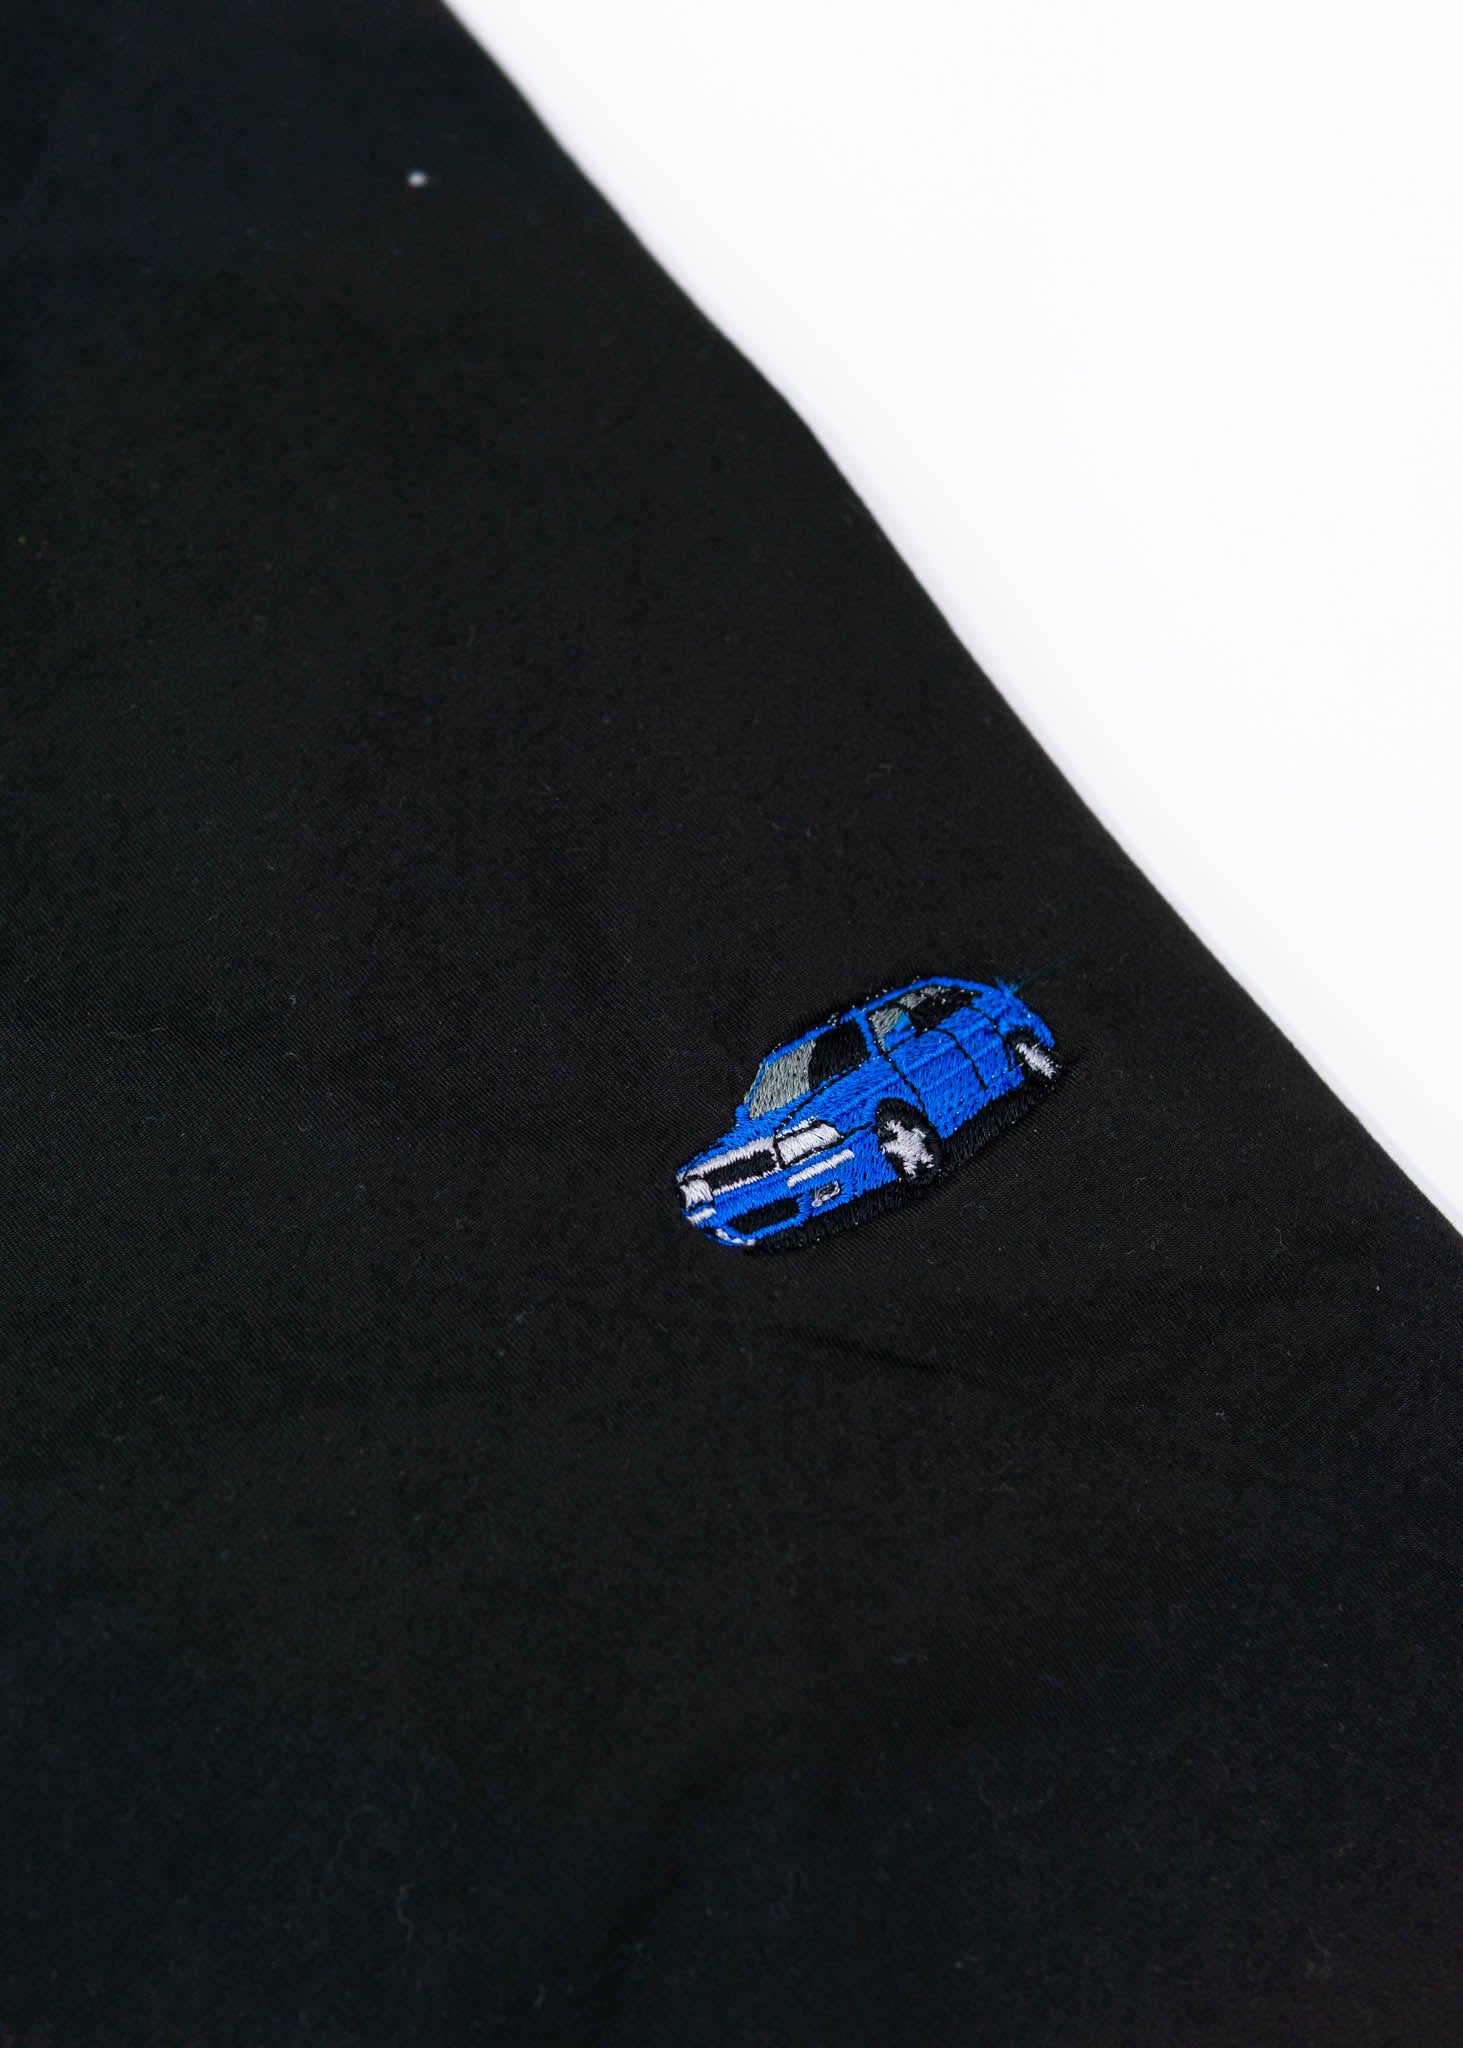 A black Audi t-shirt for men. Photo is a close up of the shirt with an embroidered a Nogaro Blue Audi 80 Avant made by Porsche. Fabric composition is 100% polyester. The material is very soft, stretchy, non-transparent. The style of this shirt is short sleeve, with a crewneck neckline.